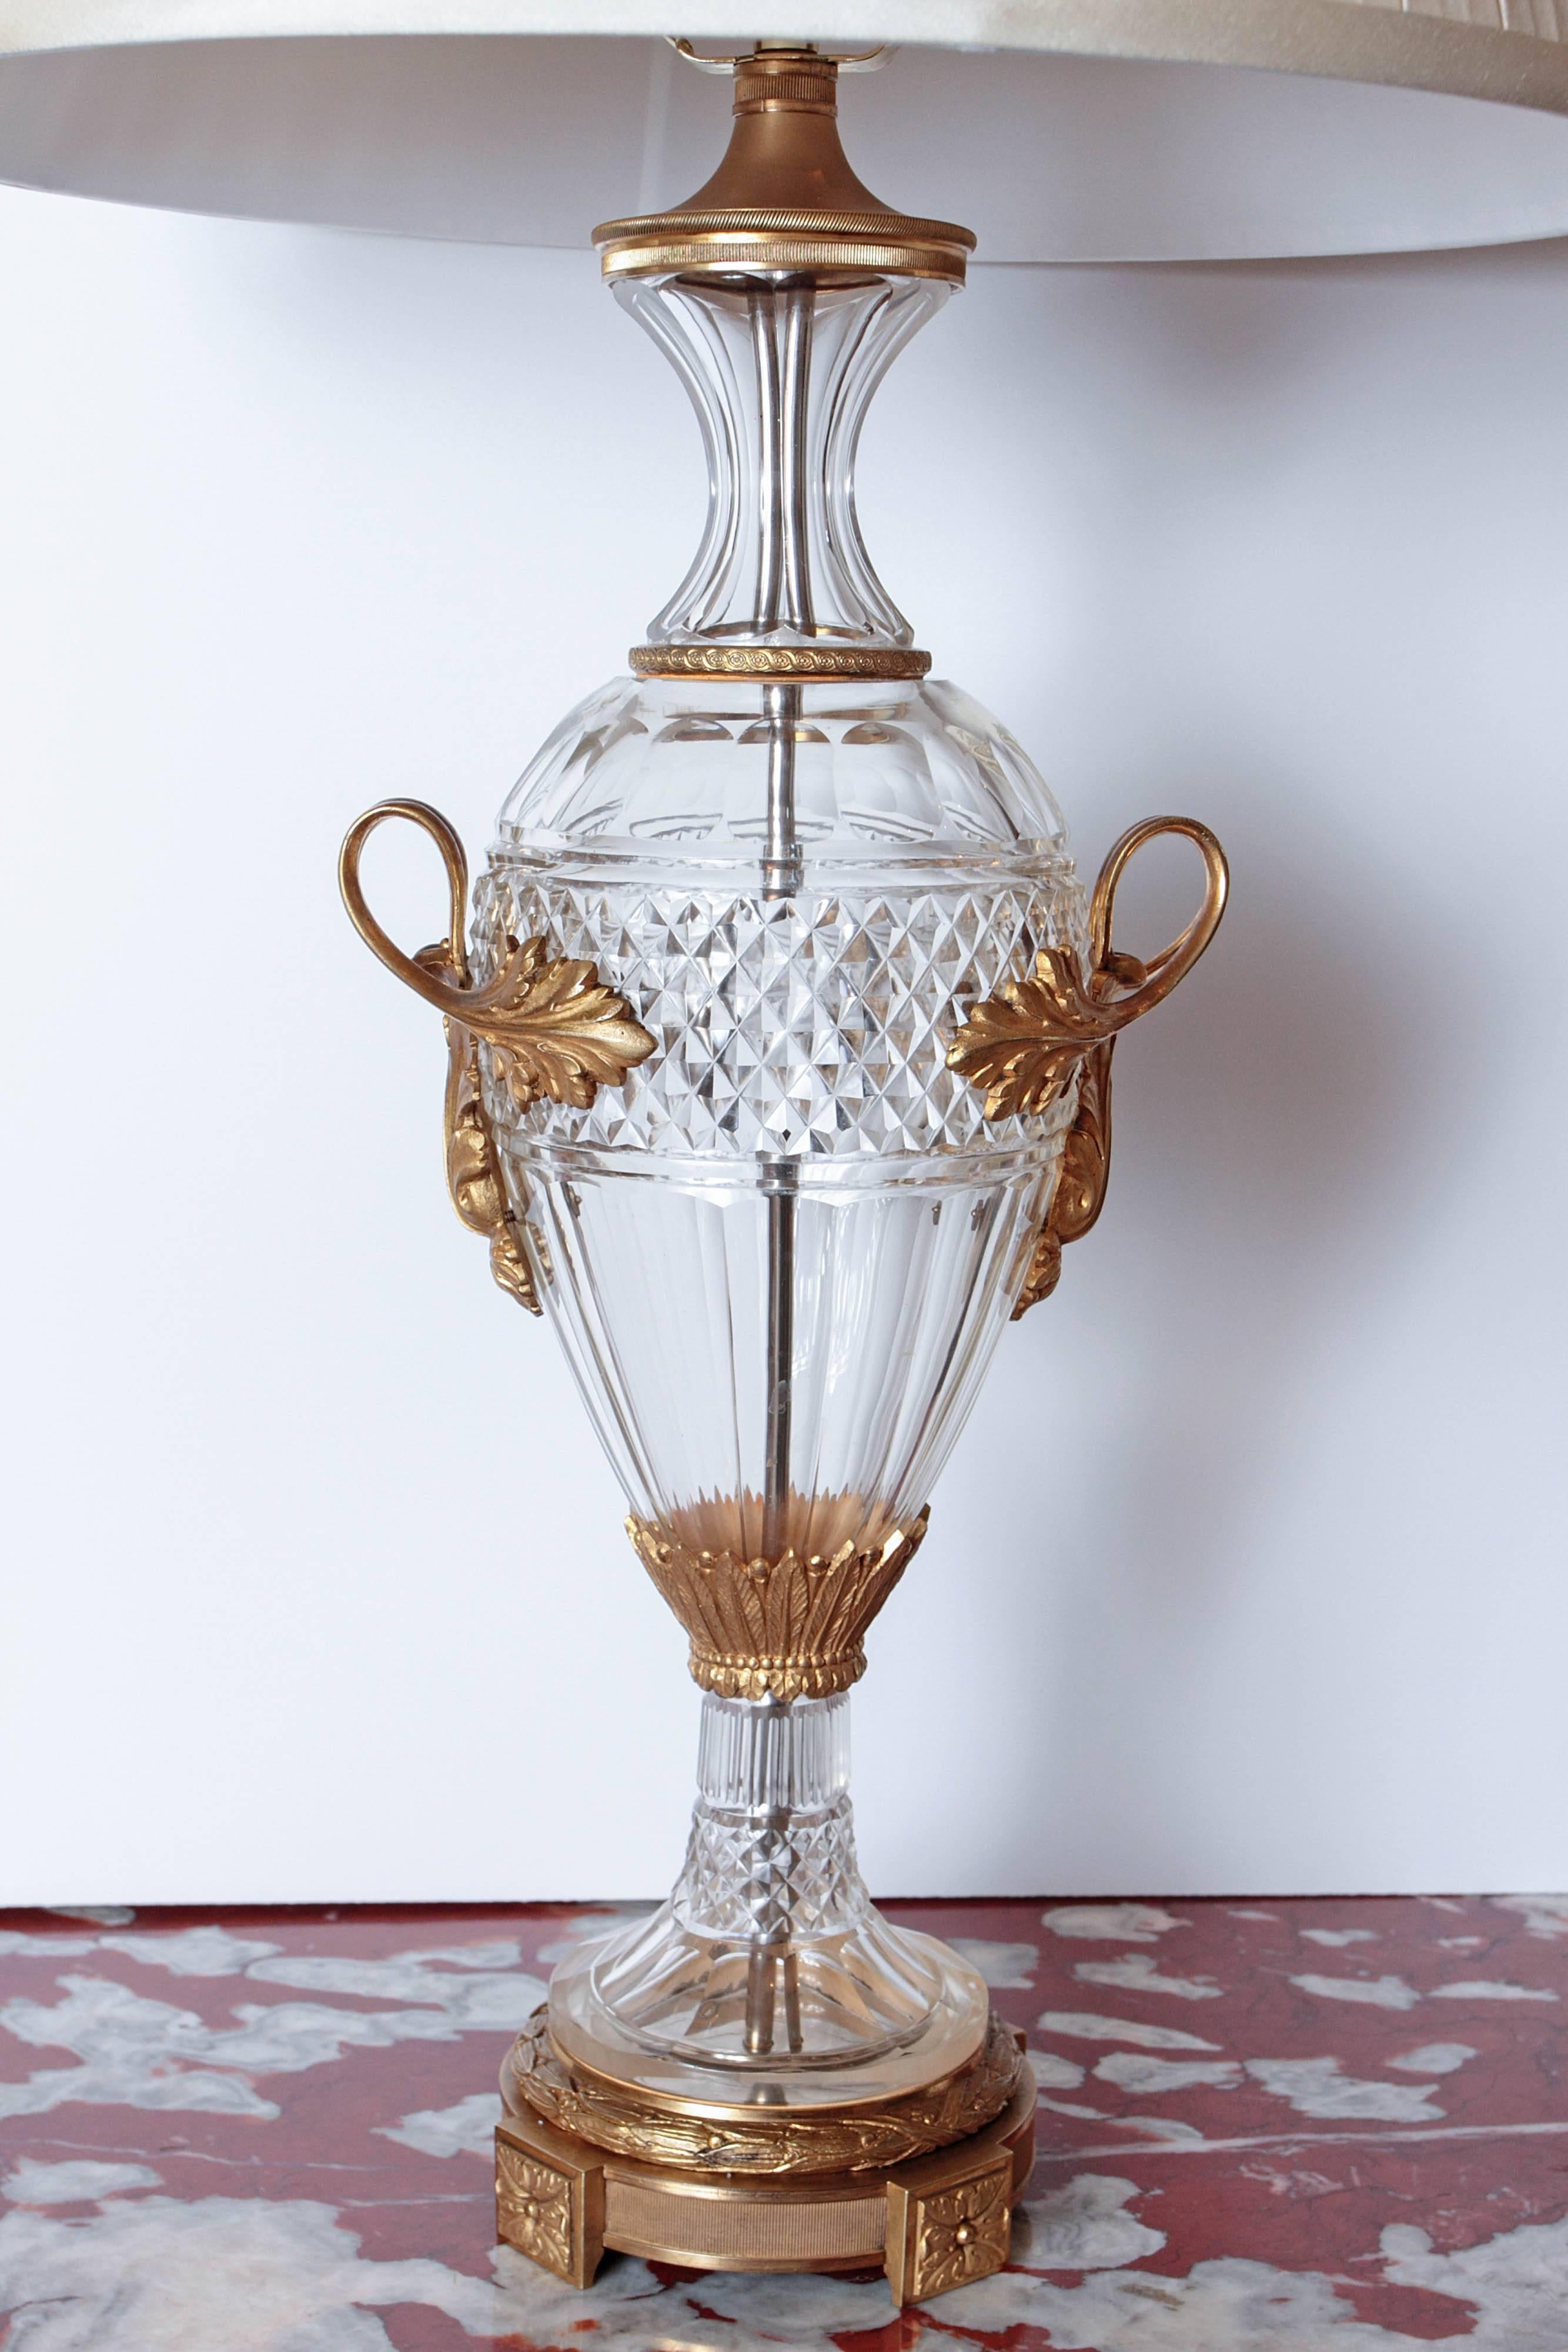 French Pair of Late 19th Century Cut Crystal and Gilt Bronze Urns Made into Lamps